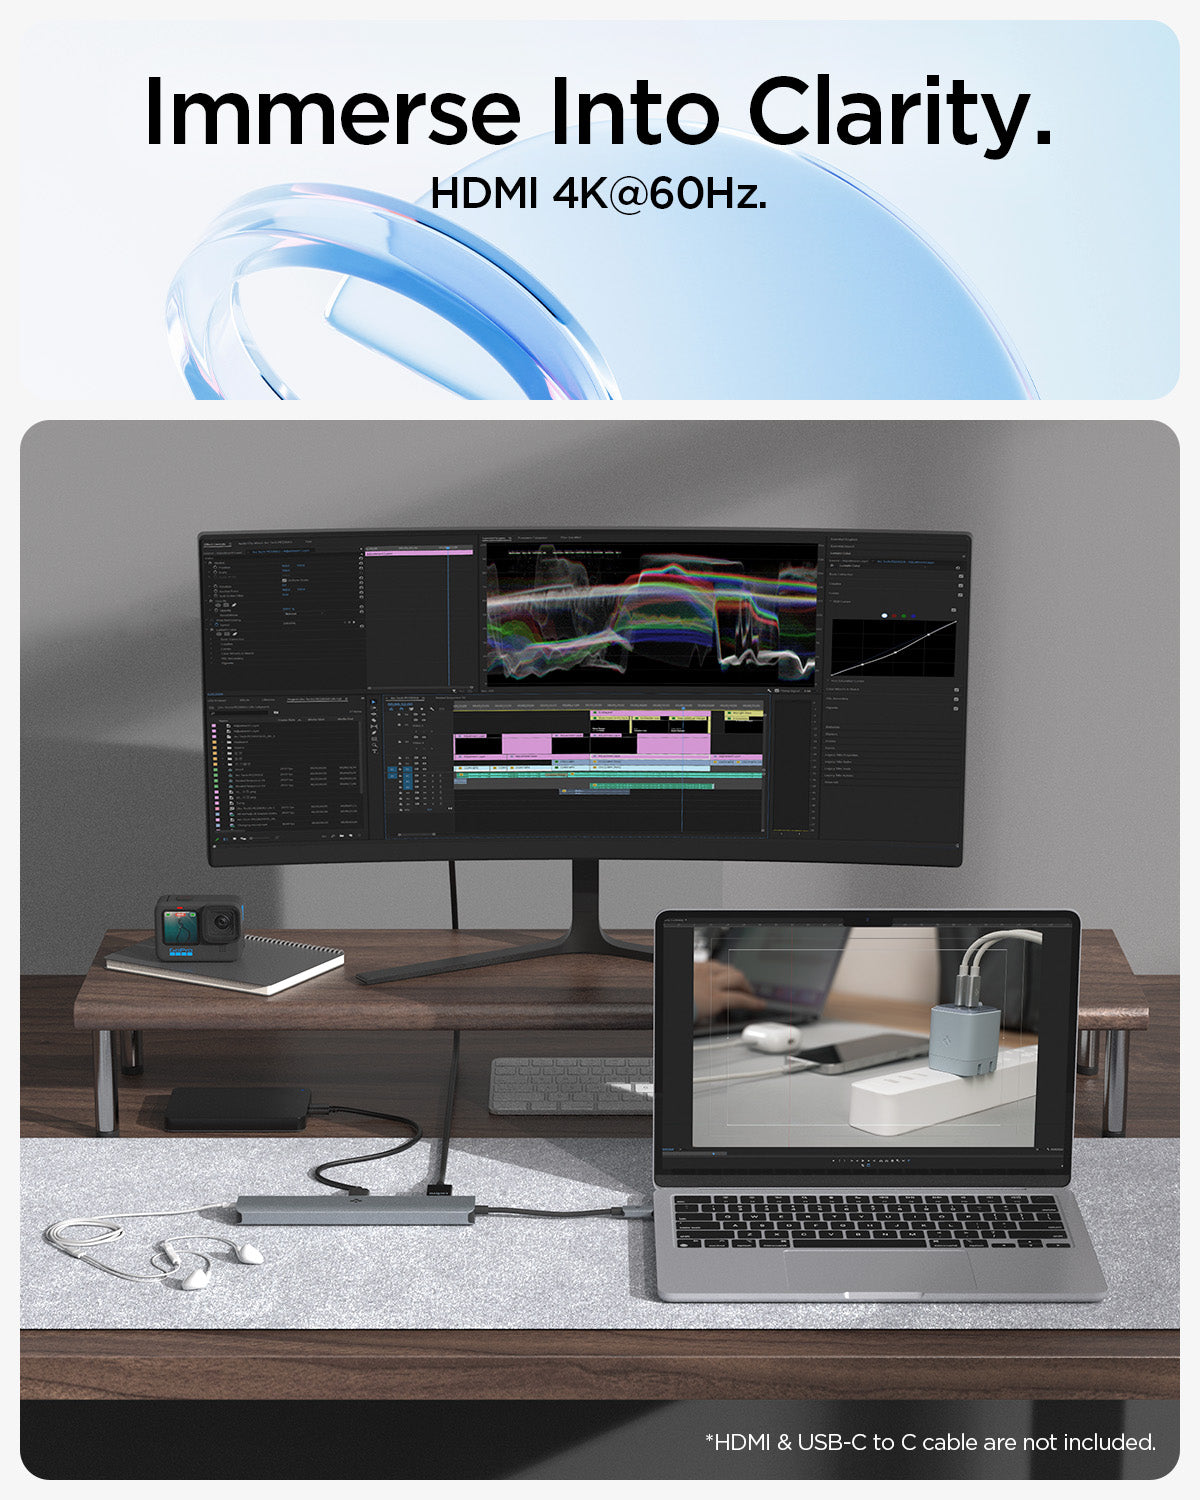 ACA06388 - ArcDock Multi Hub 9-in-1 PD2306 in Space Gray showing the Immerse Into Clarity. HDMI 4K@60Hz. Showing two devices attached to a hub at the same time. (HDMI & USB-C to C cable are not included.)